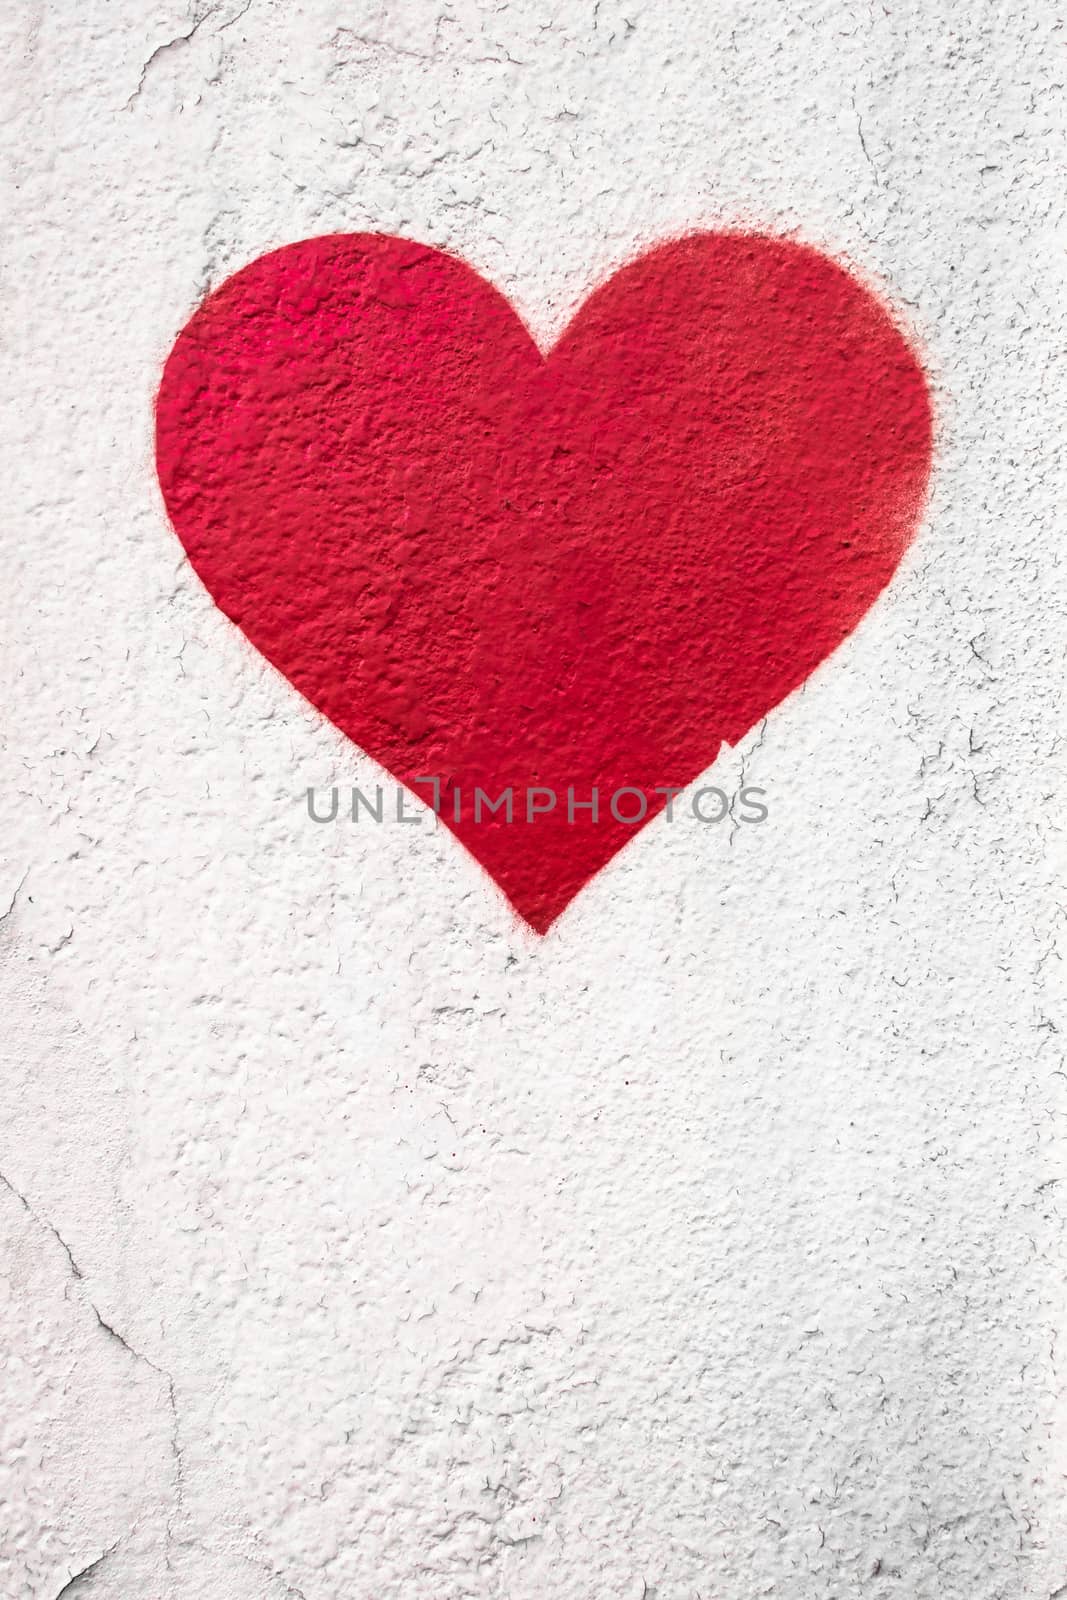 Red love heart hand drawn on grungy wall. Textured background trendy street style. Copy space.